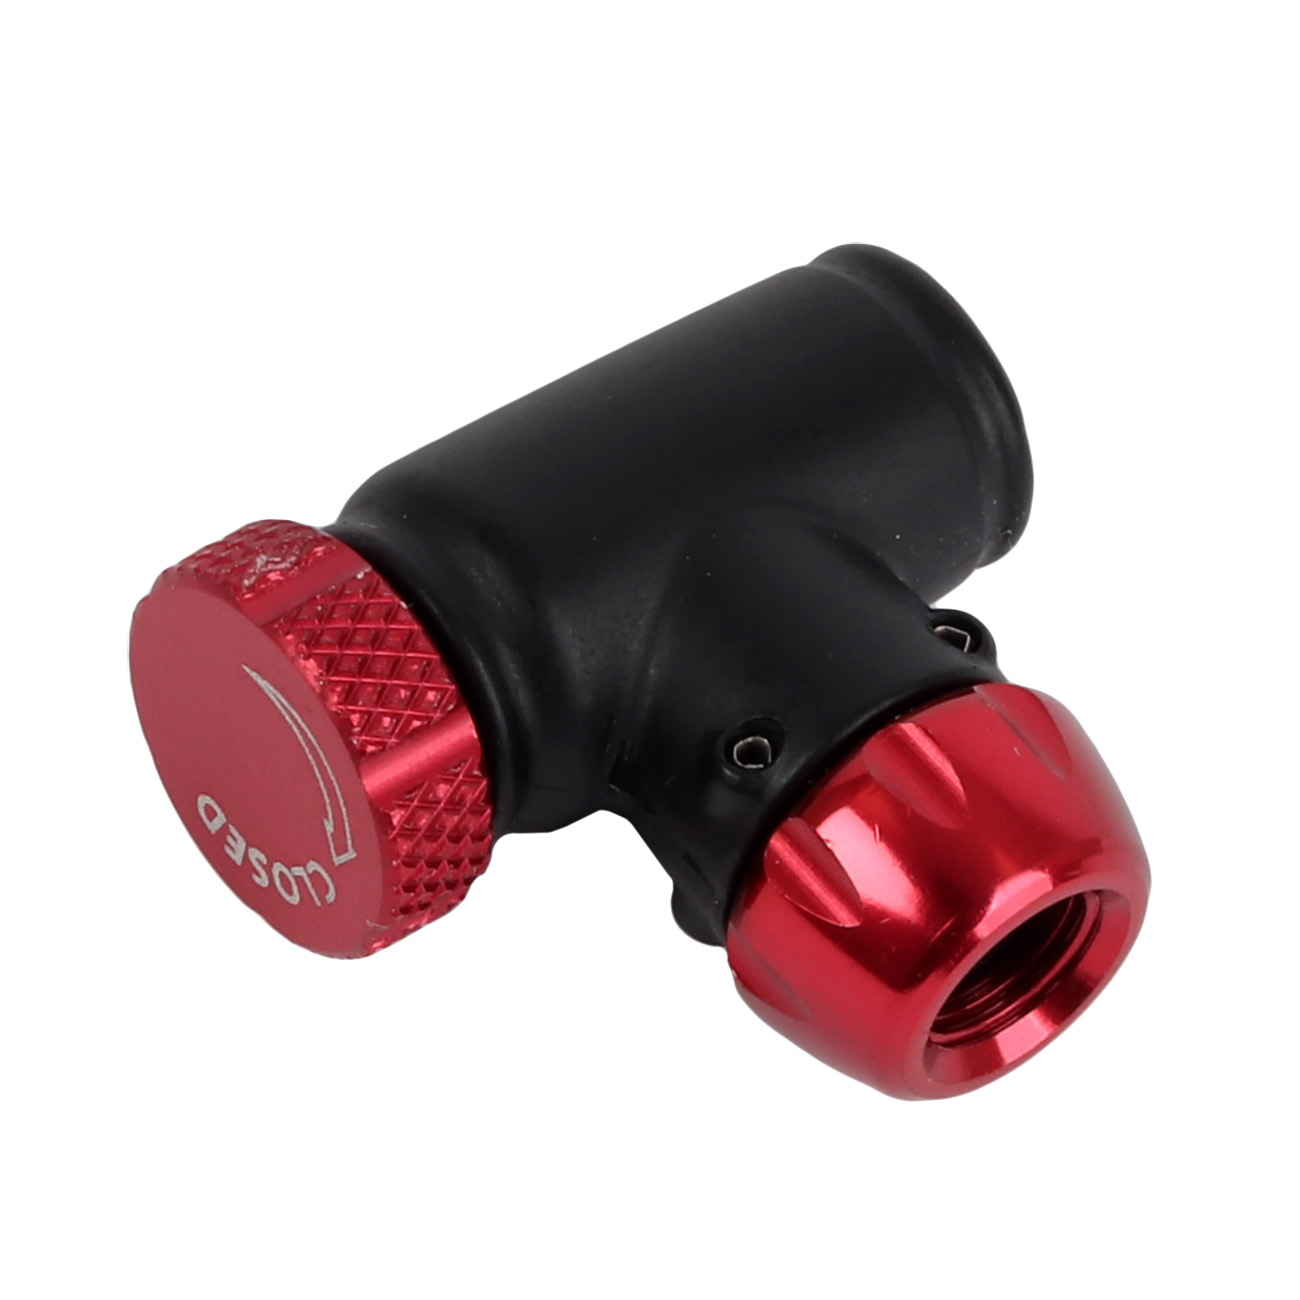 Picture of SILCA Eolo IV CO2 Cartridge Pump - black/red